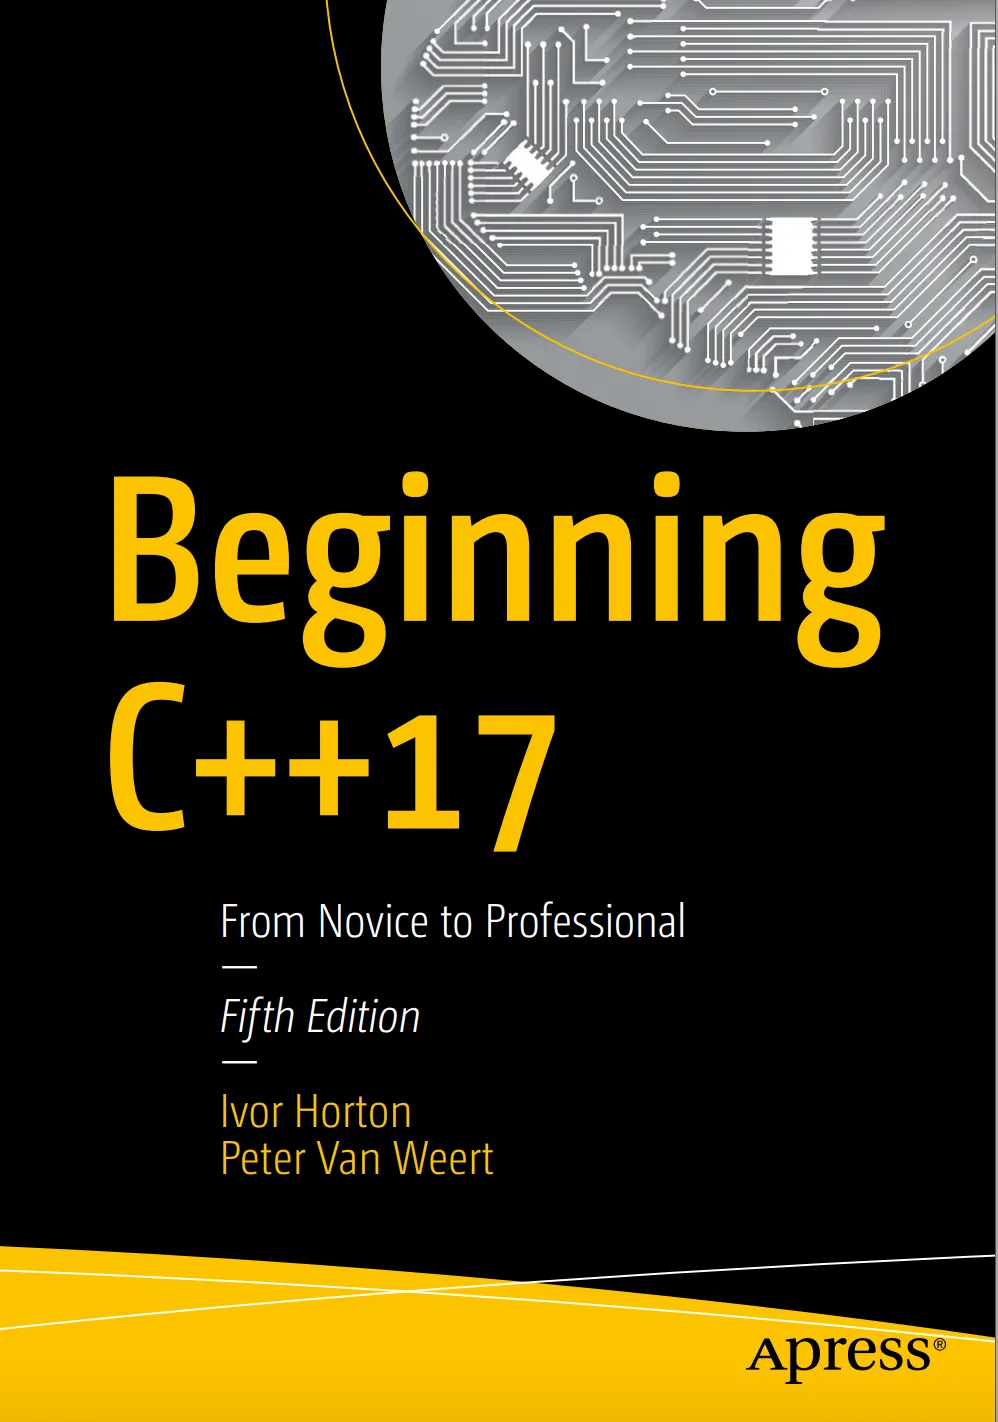 Beginning C++17: From Novice to Professional